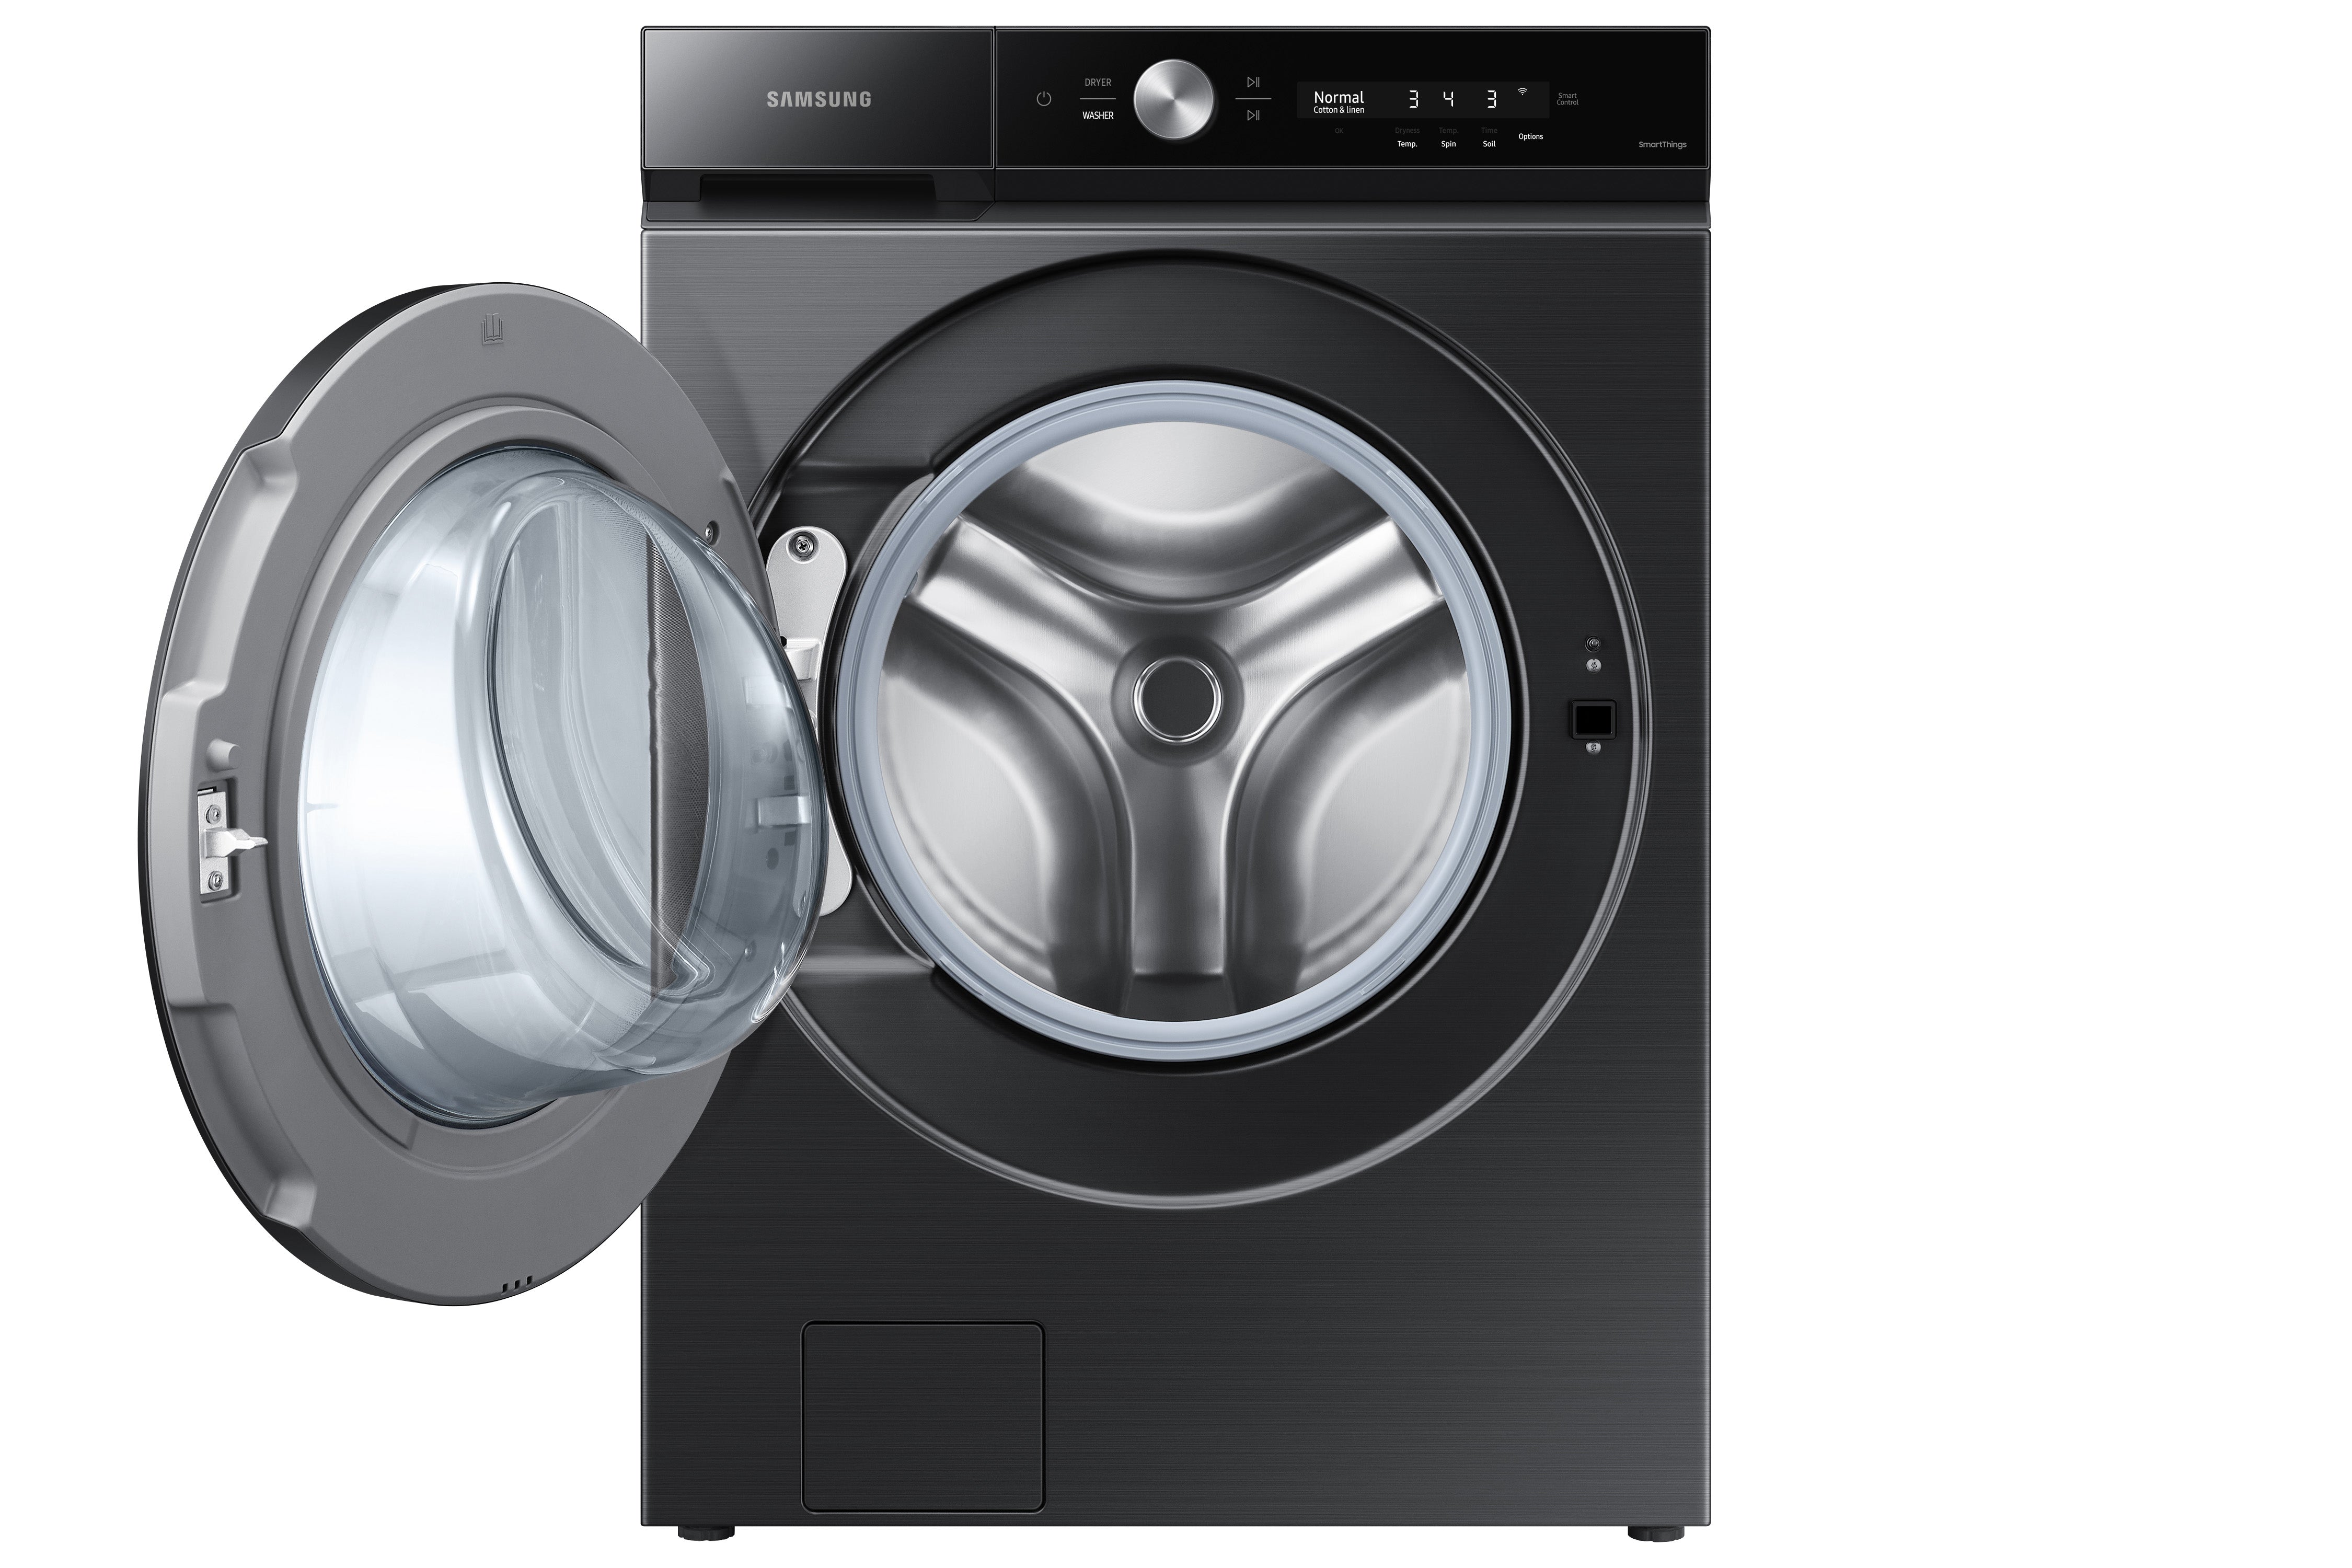 Samsung - Bespoke 6.1 cu. Ft  Front Load Washer in Black Stainless - WF53BB8700AVUS